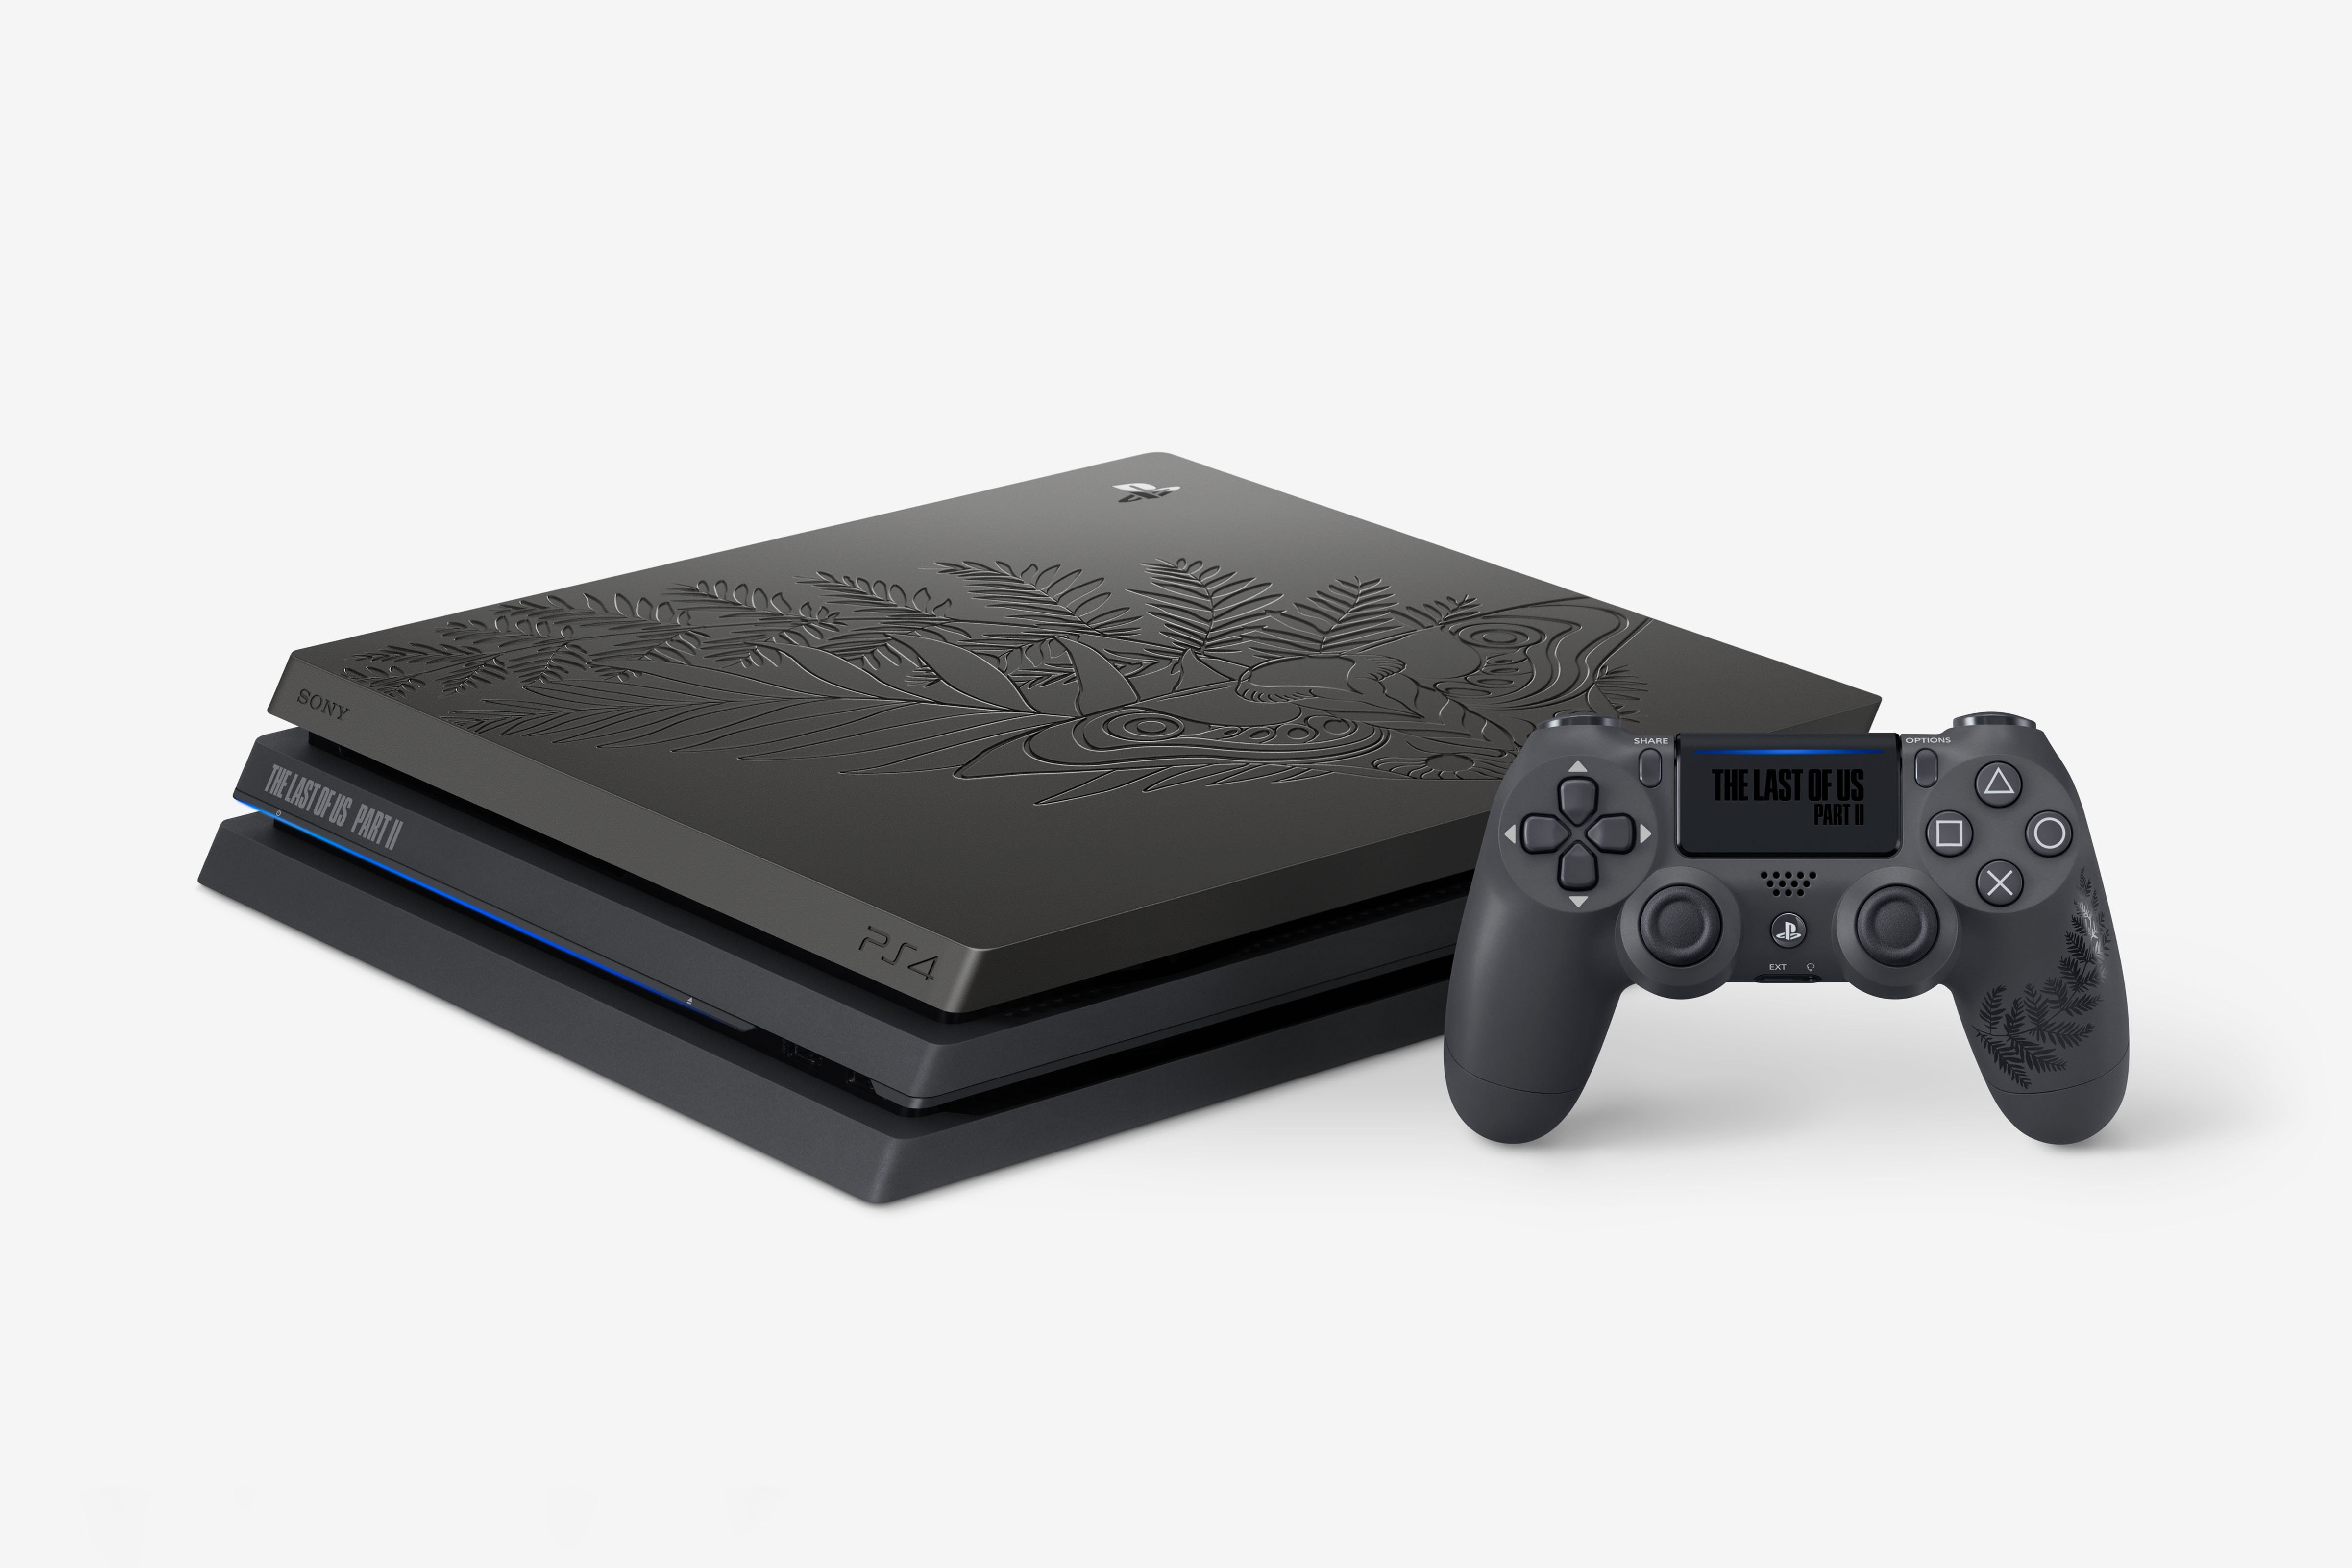 Limited Edition "Last of Us" PS4 Pro